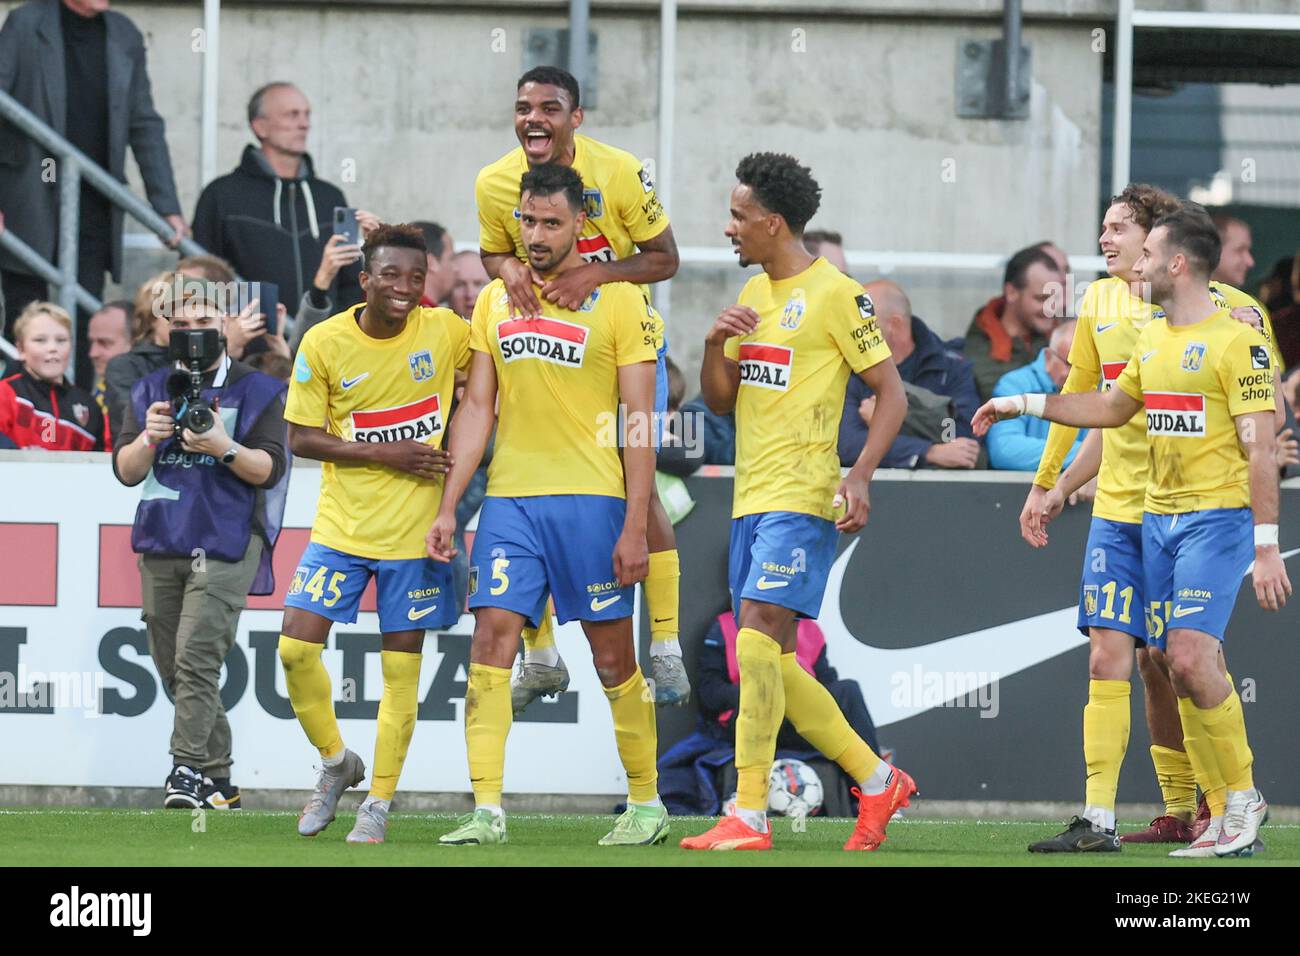 Westerlo's Nacer Chadli celebrates after scoring during a soccer match between KVC Westerlo and KV Oostende, Saturday 12 November 2022 in Westerlo, on day 17 of the 2022-2023 'Jupiler Pro League' first division of the Belgian championship. BELGA PHOTO BRUNO FAHY Stock Photo